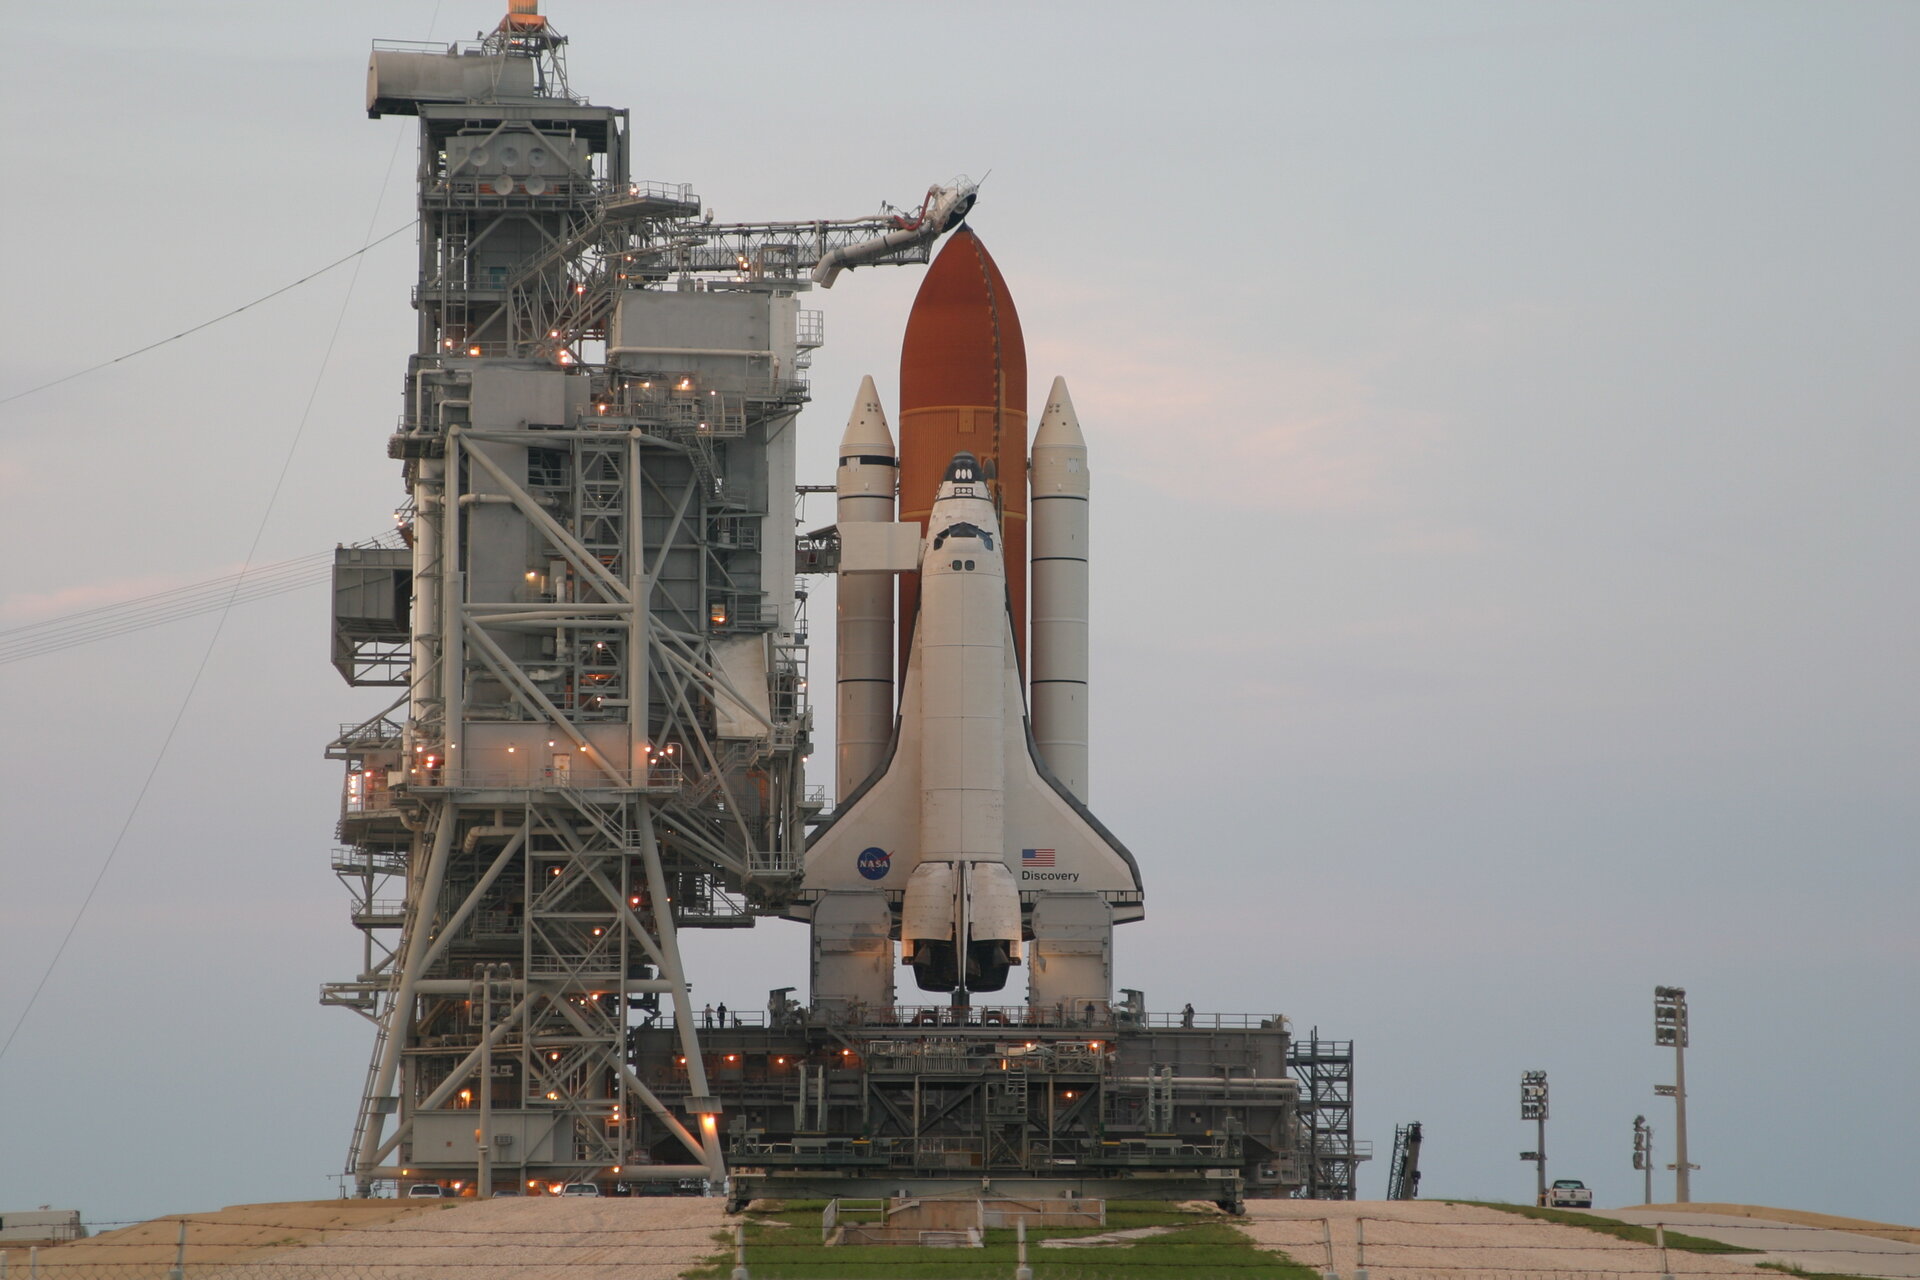 Space Shuttle Discovery stands ready on Launch Pad 39B